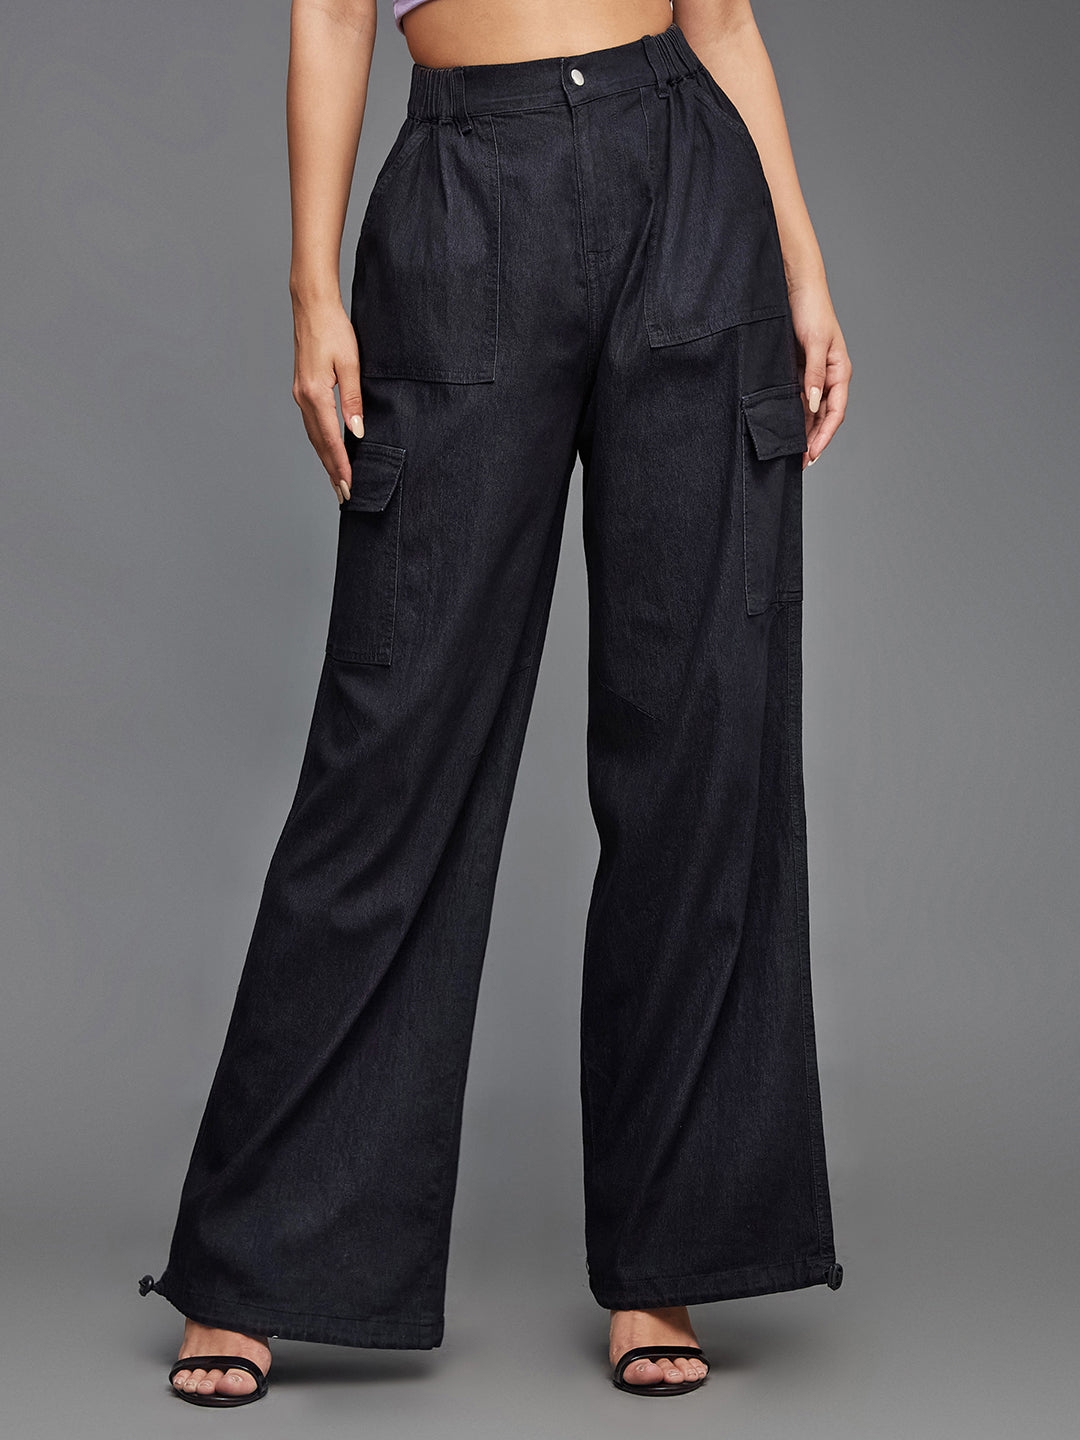 MISS CHASE | Women's Black Solid Straight Jeans